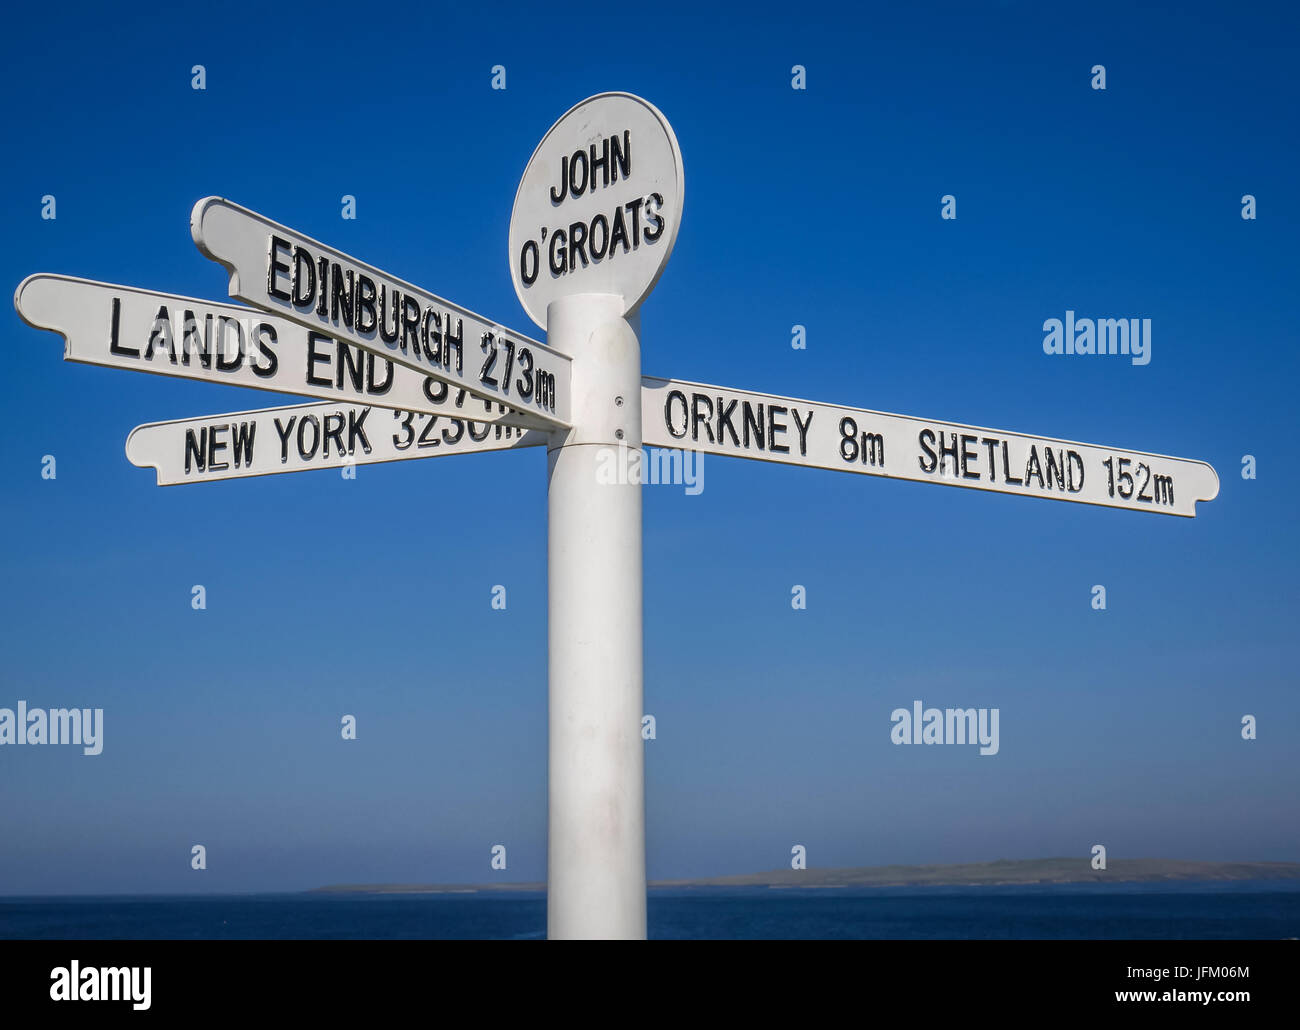 Signpost at John O'Groats against cloudless blue sky indicating miles to Edinburgh, New York, Orkney, Shetland and Lands End, Scotland, UK Stock Photo